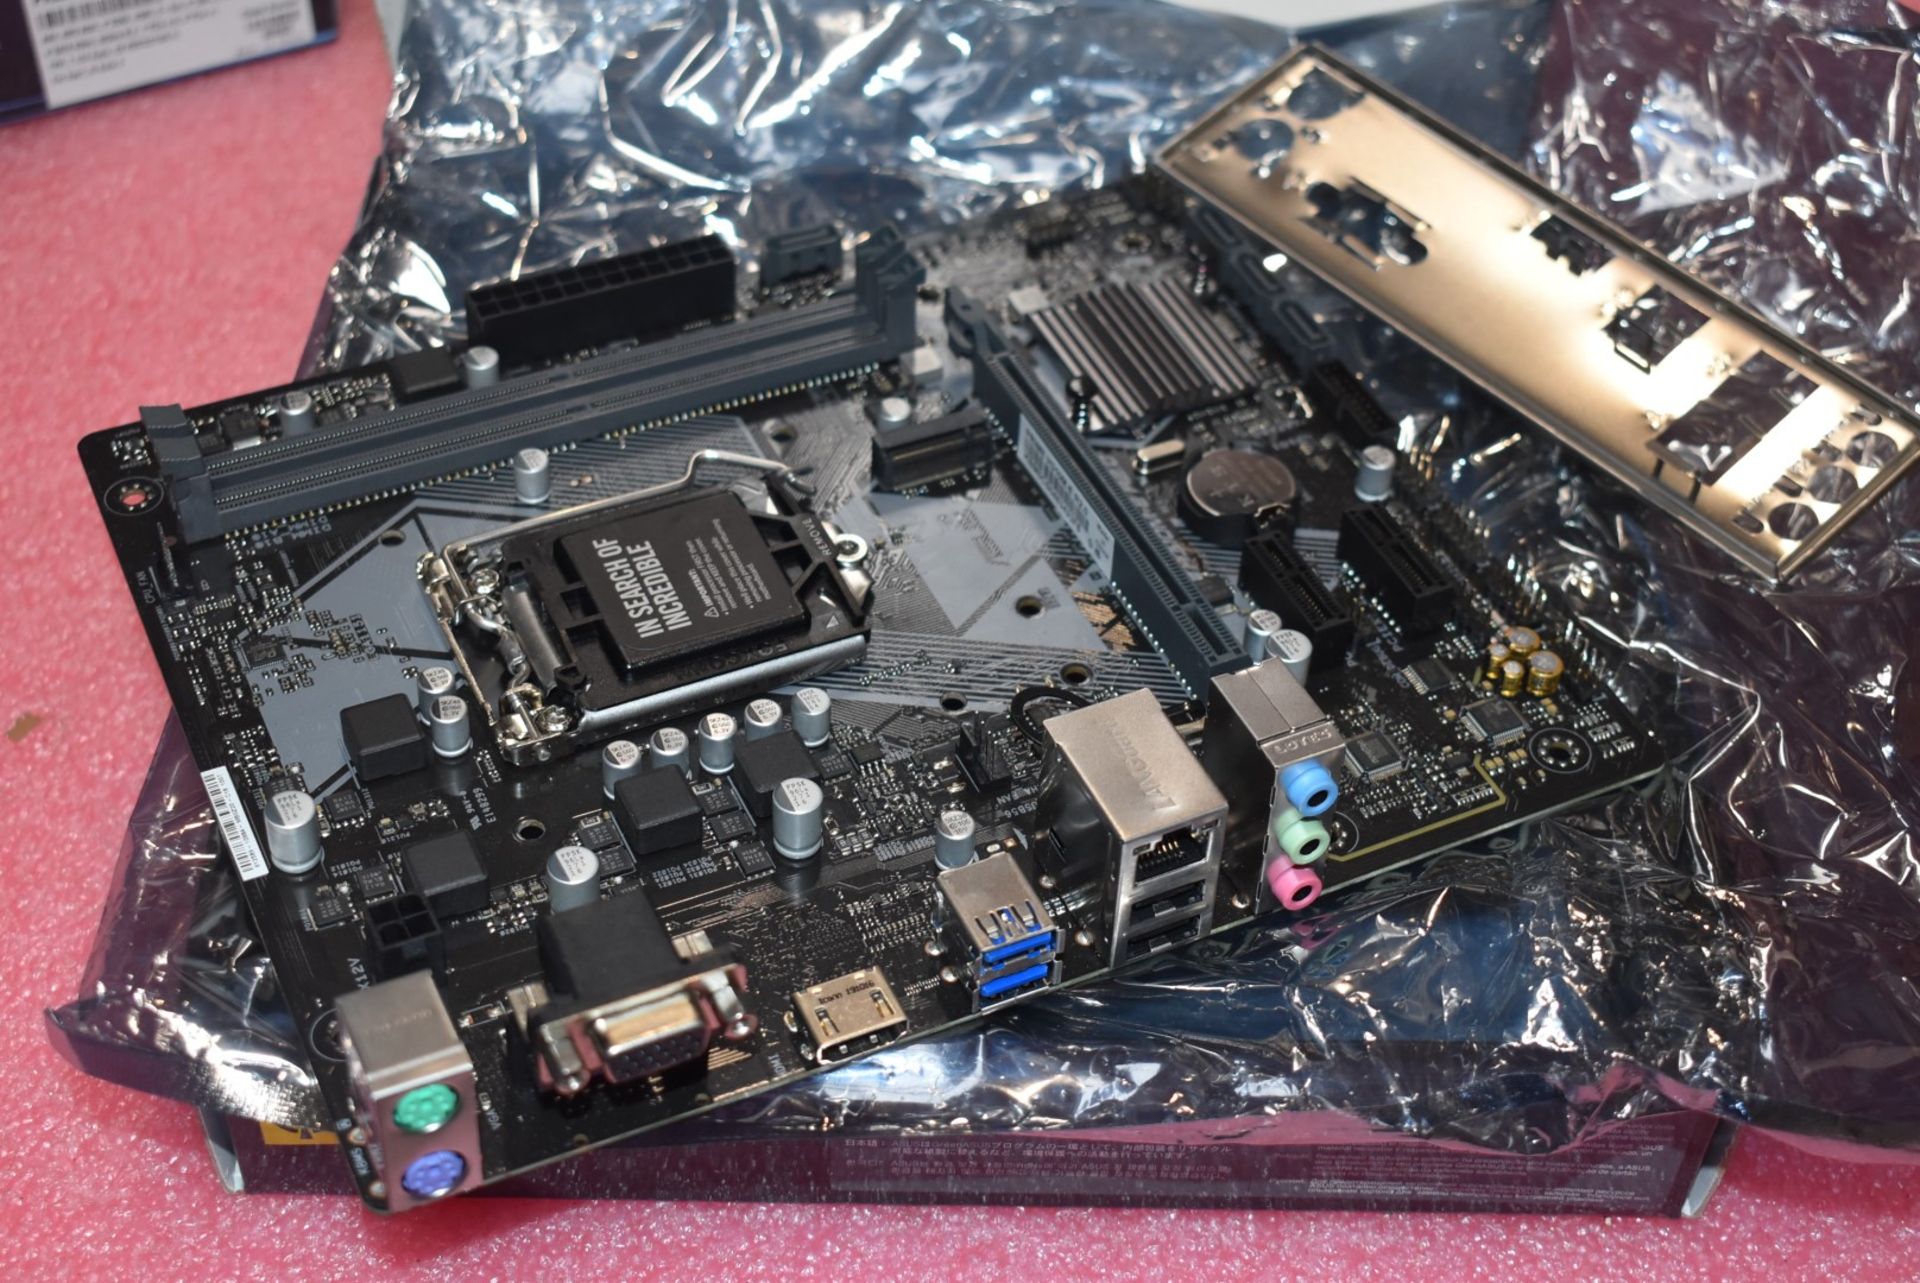 1 x Asus Prime H310M-E Intel LGA1151 Motherboard - Boxed With Accessories - Image 3 of 5